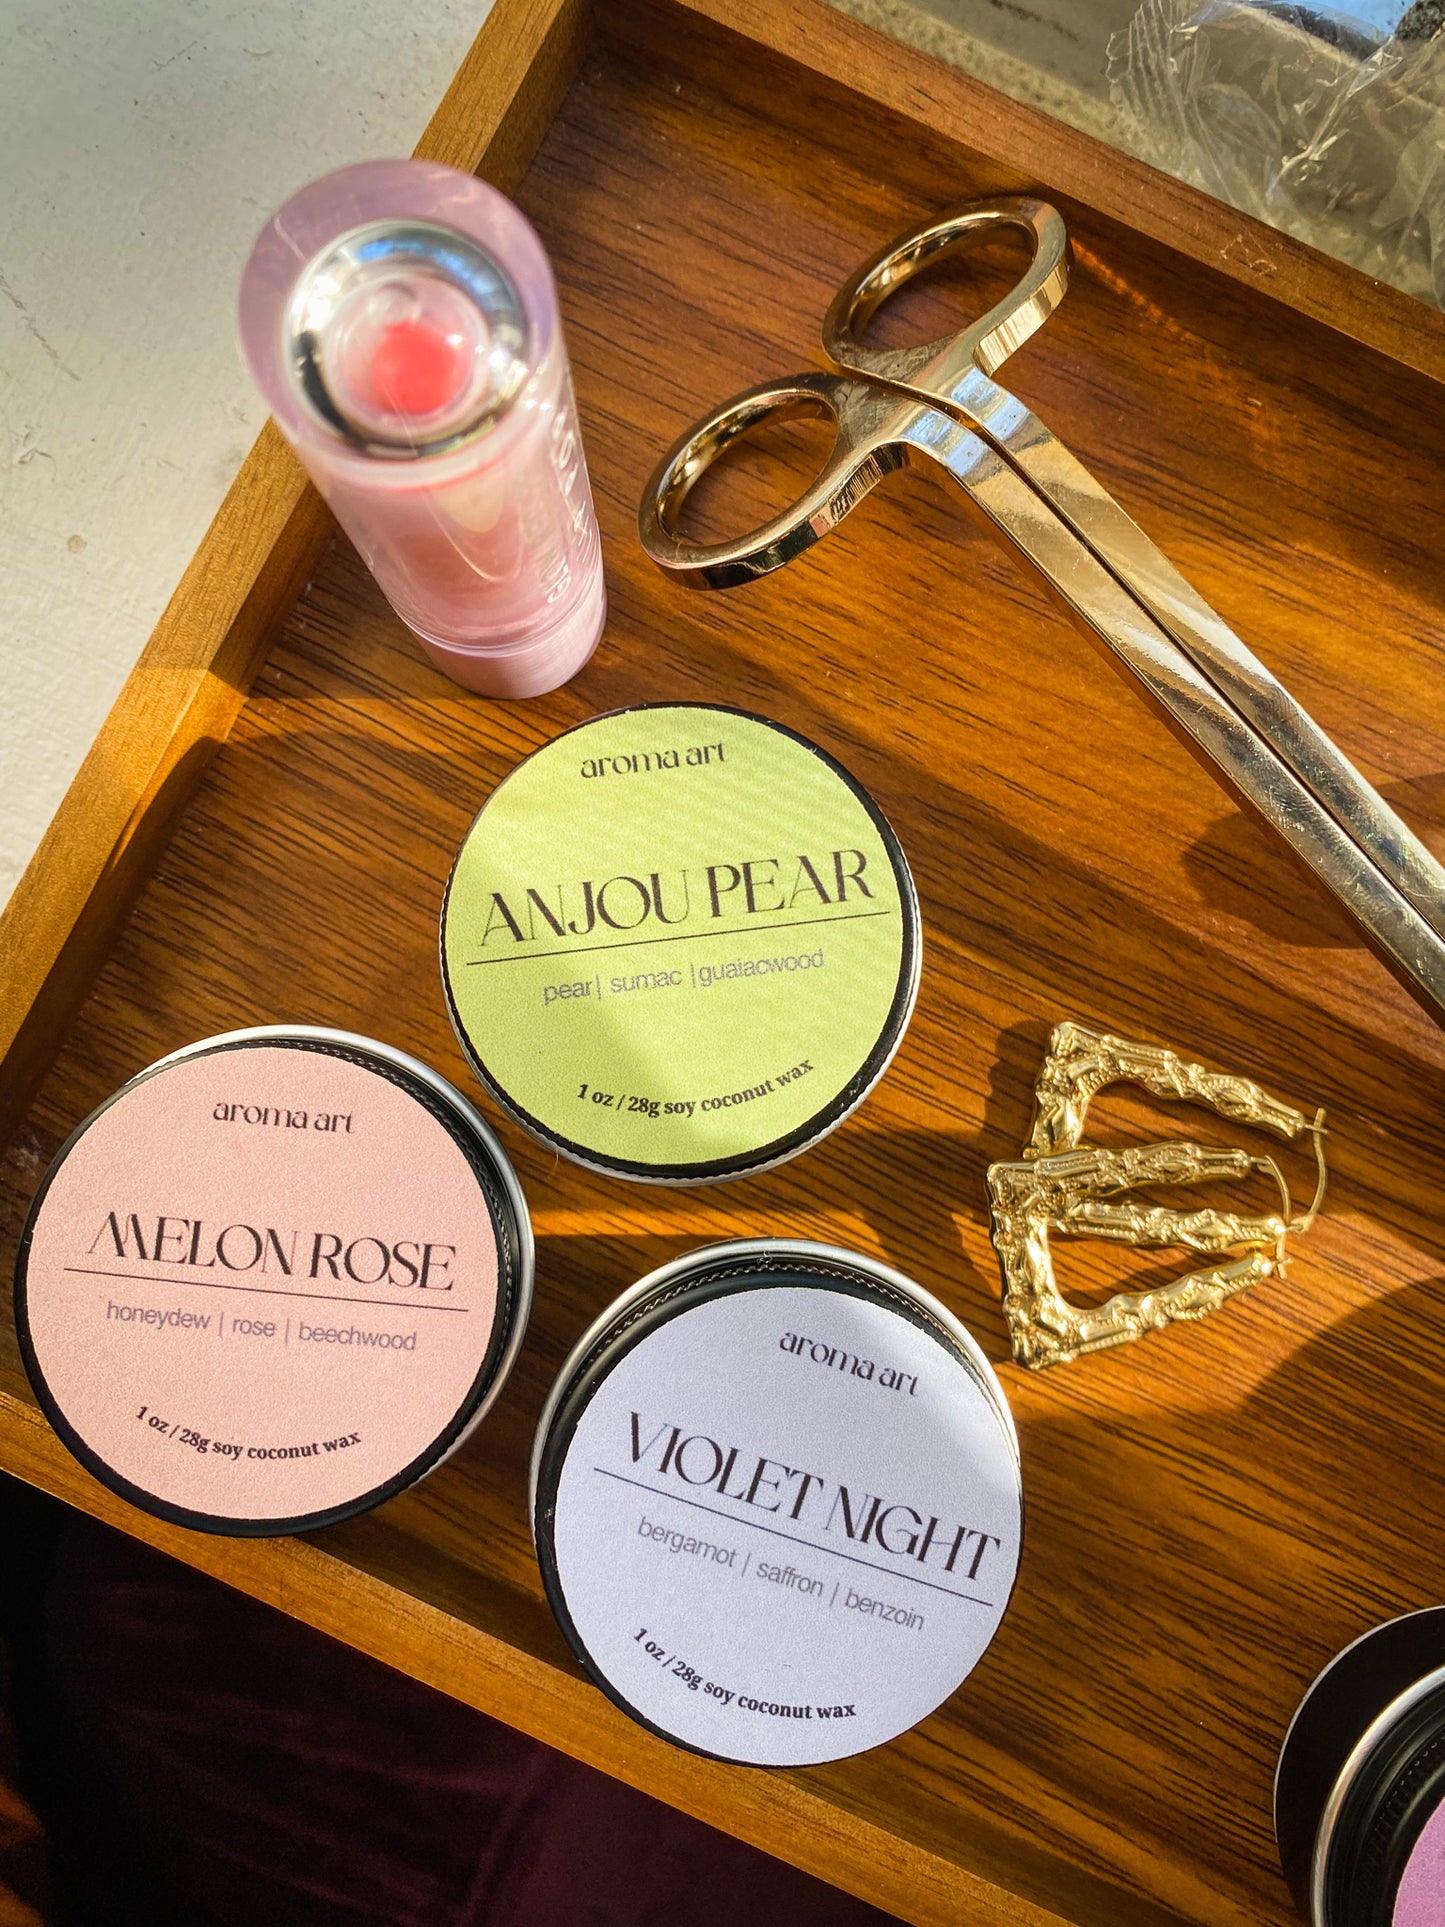 Artfully arranged on a wooden tray are travel sized tin candles in the scents Melon Rose (notes of honeydew, rose, and beechwood), Anjou Pear (notes of pear, sumac, and guaiac wood), and Violet Night (notes of bergamot, saffron, and benzoin).